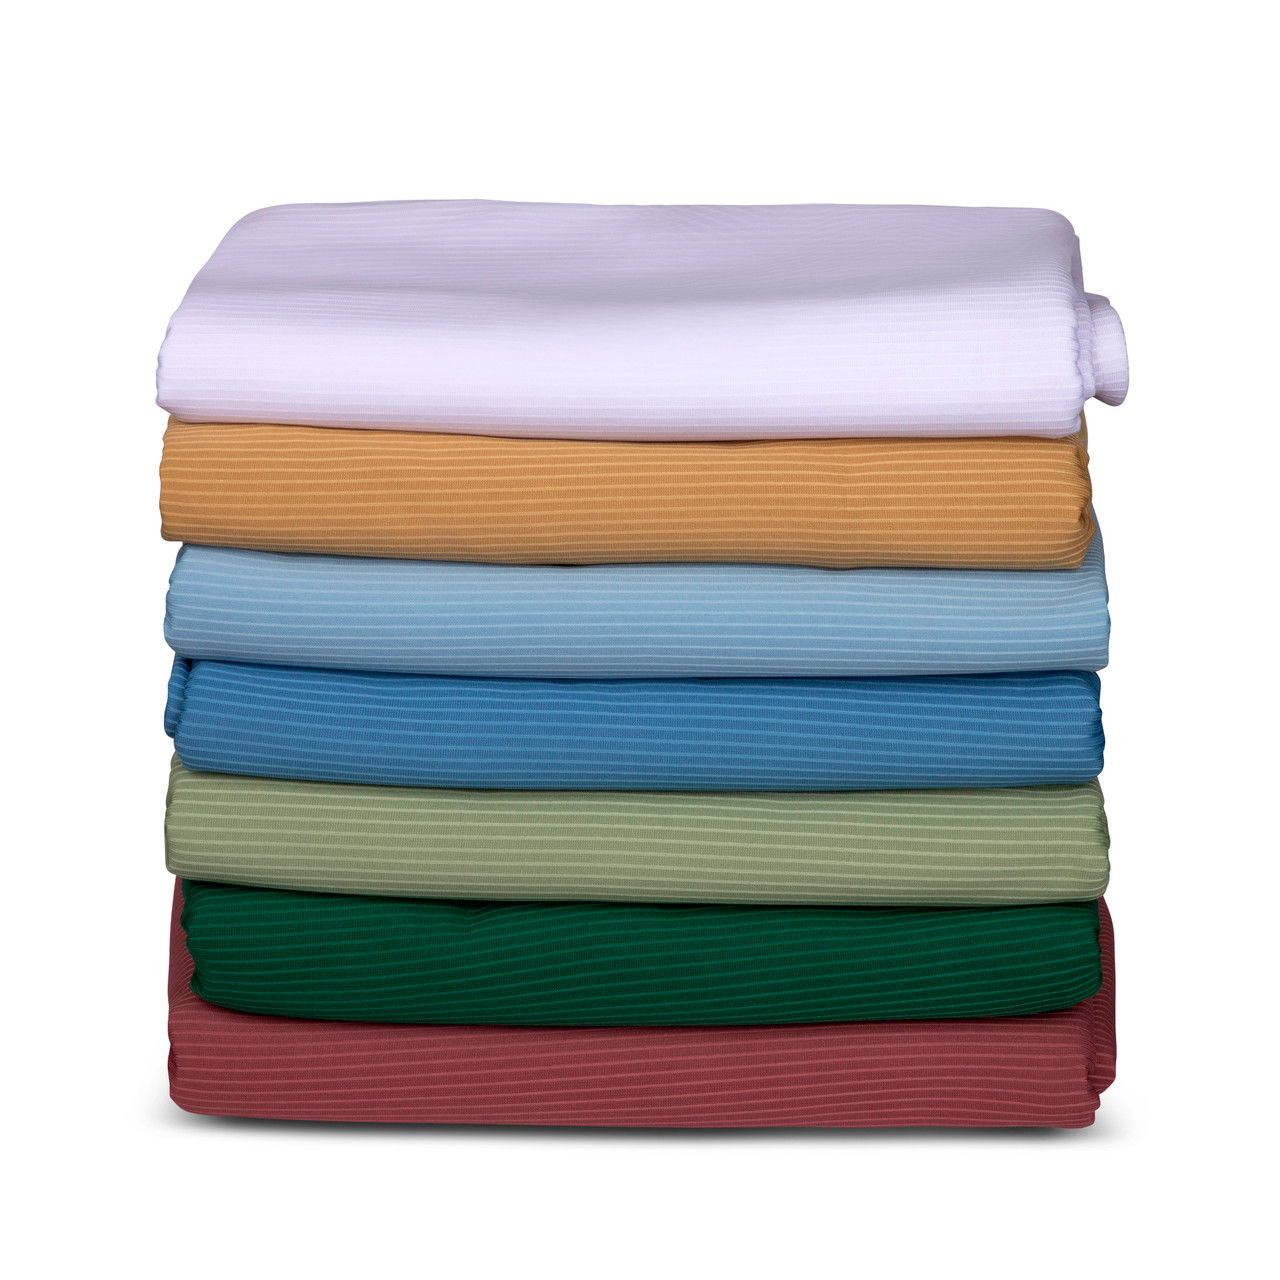 What guarantees does the ribcord bedspread twin's 100% polyester provide?